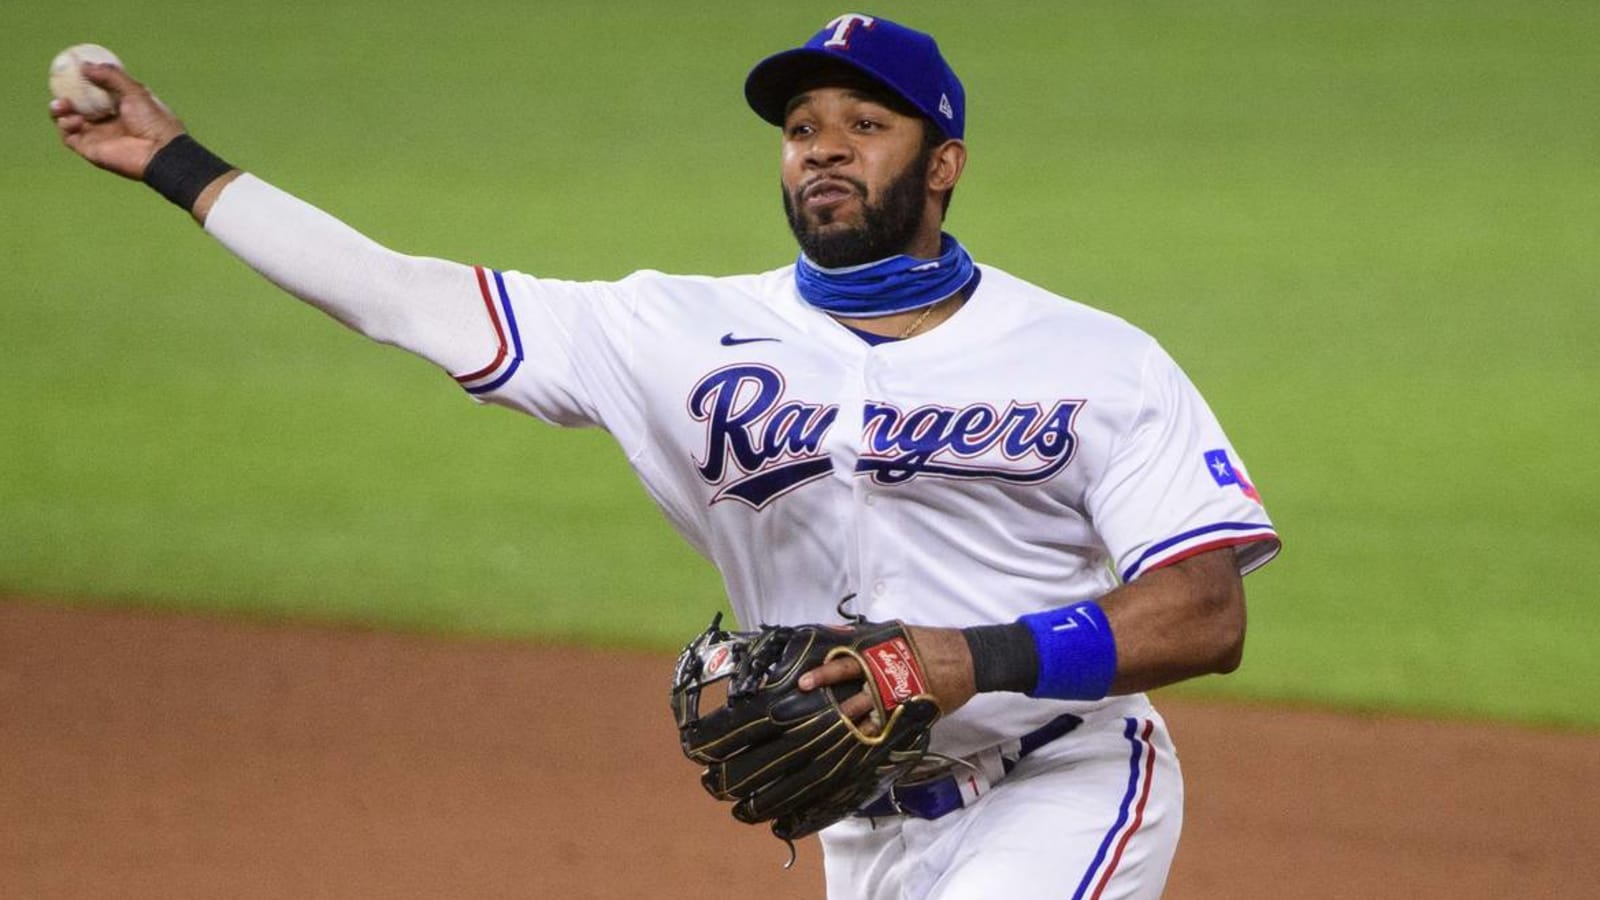 Rangers activate SS Elvis Andrus off IL, place 2B Rougned Odor on IL with eye infection